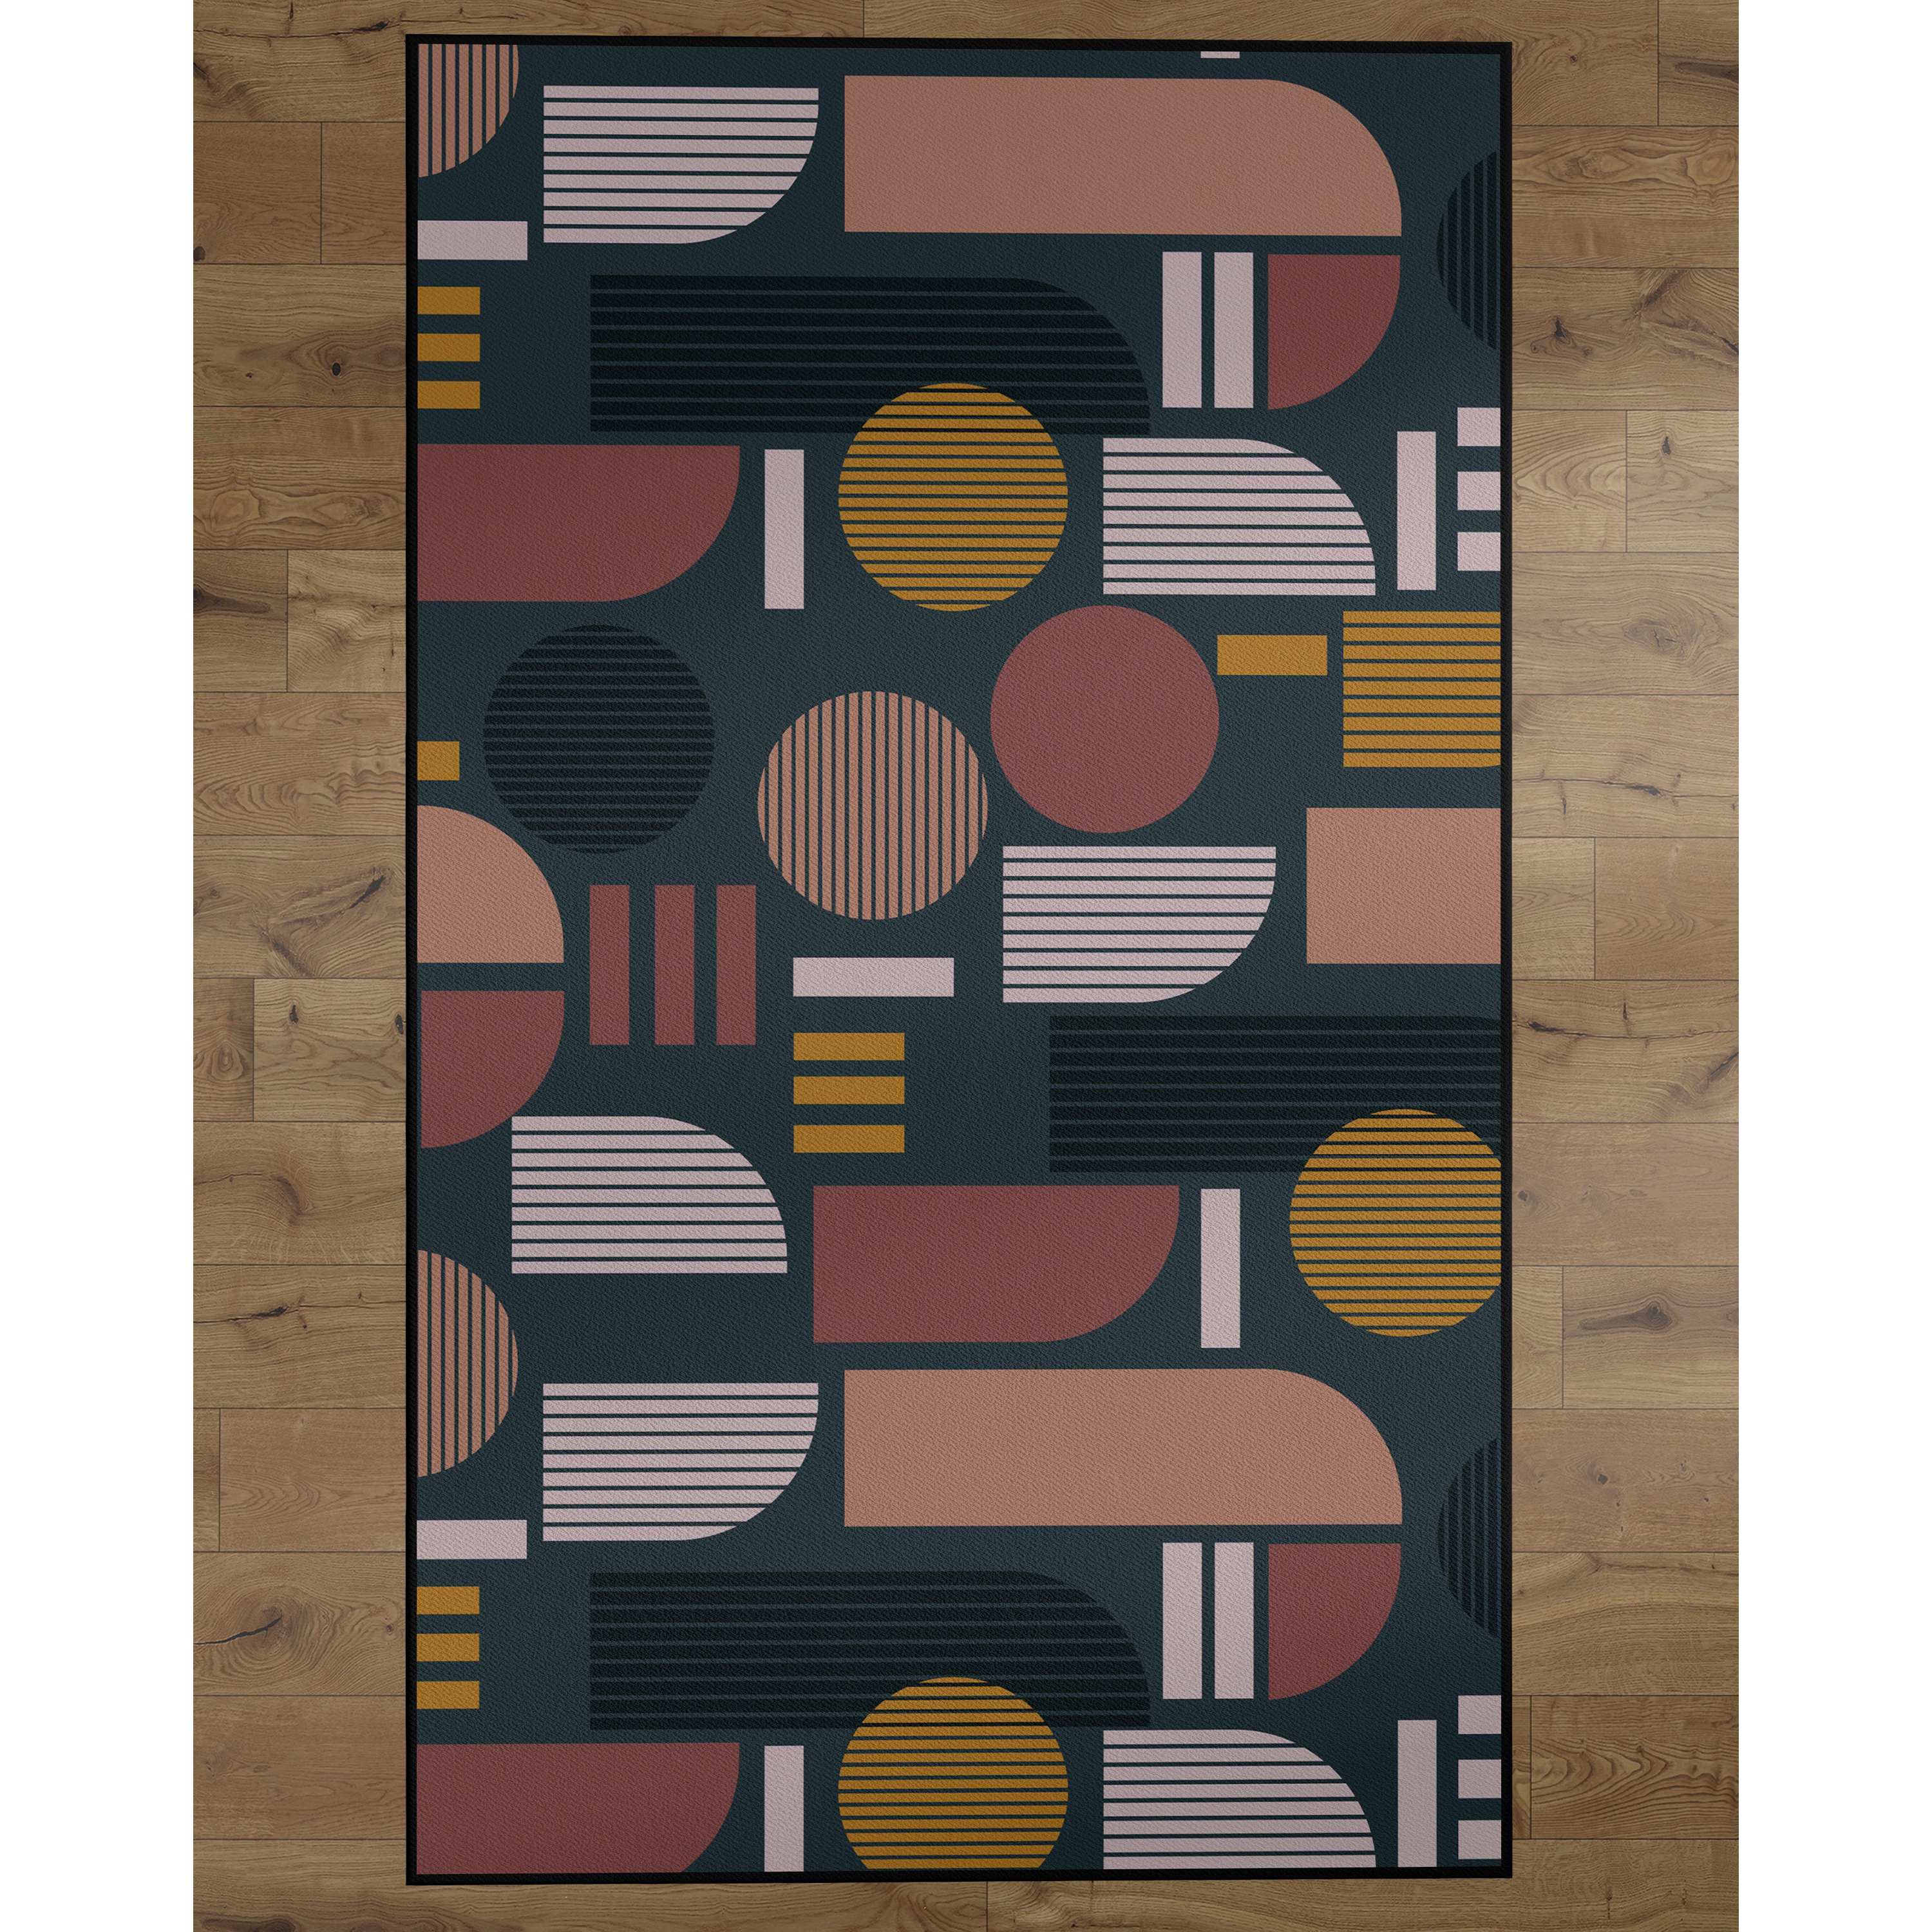 Deerlux Modern Living Room Area Rug With Nonslip Backing, Abstract Geo Pattern - 3x5